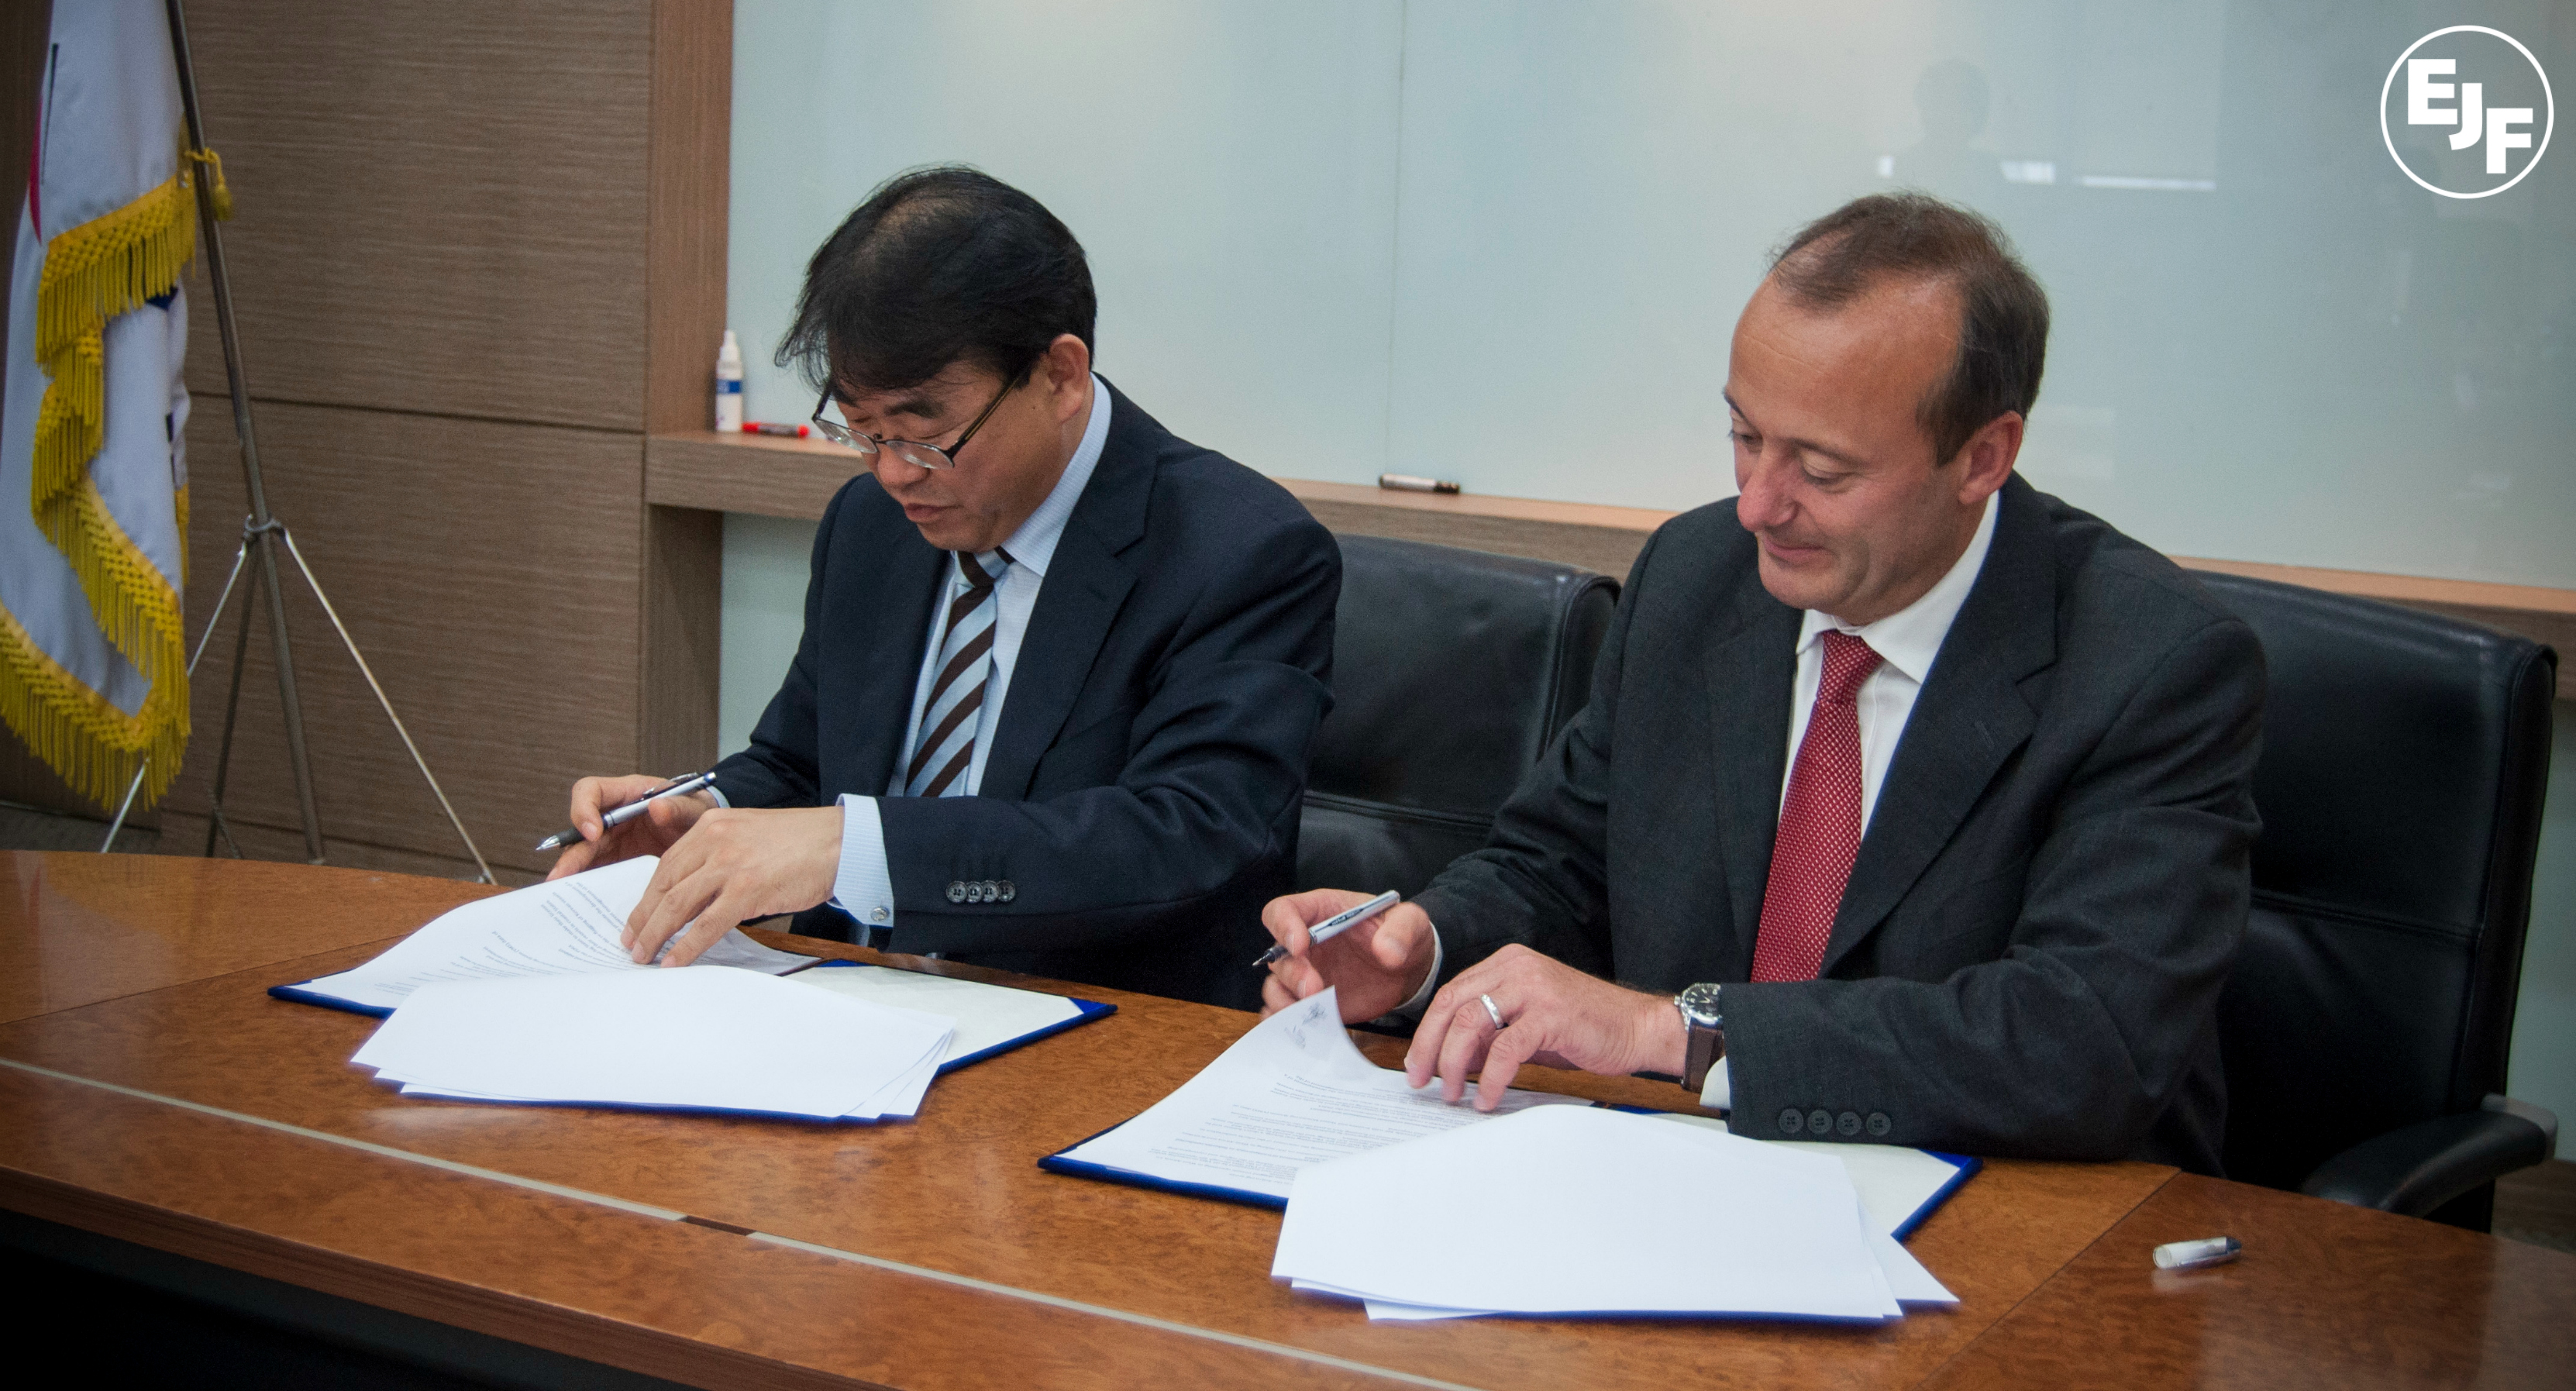 EJF and Republic of Korea sign ground-breaking MOU formalising joint initiative to combat IUU fishing